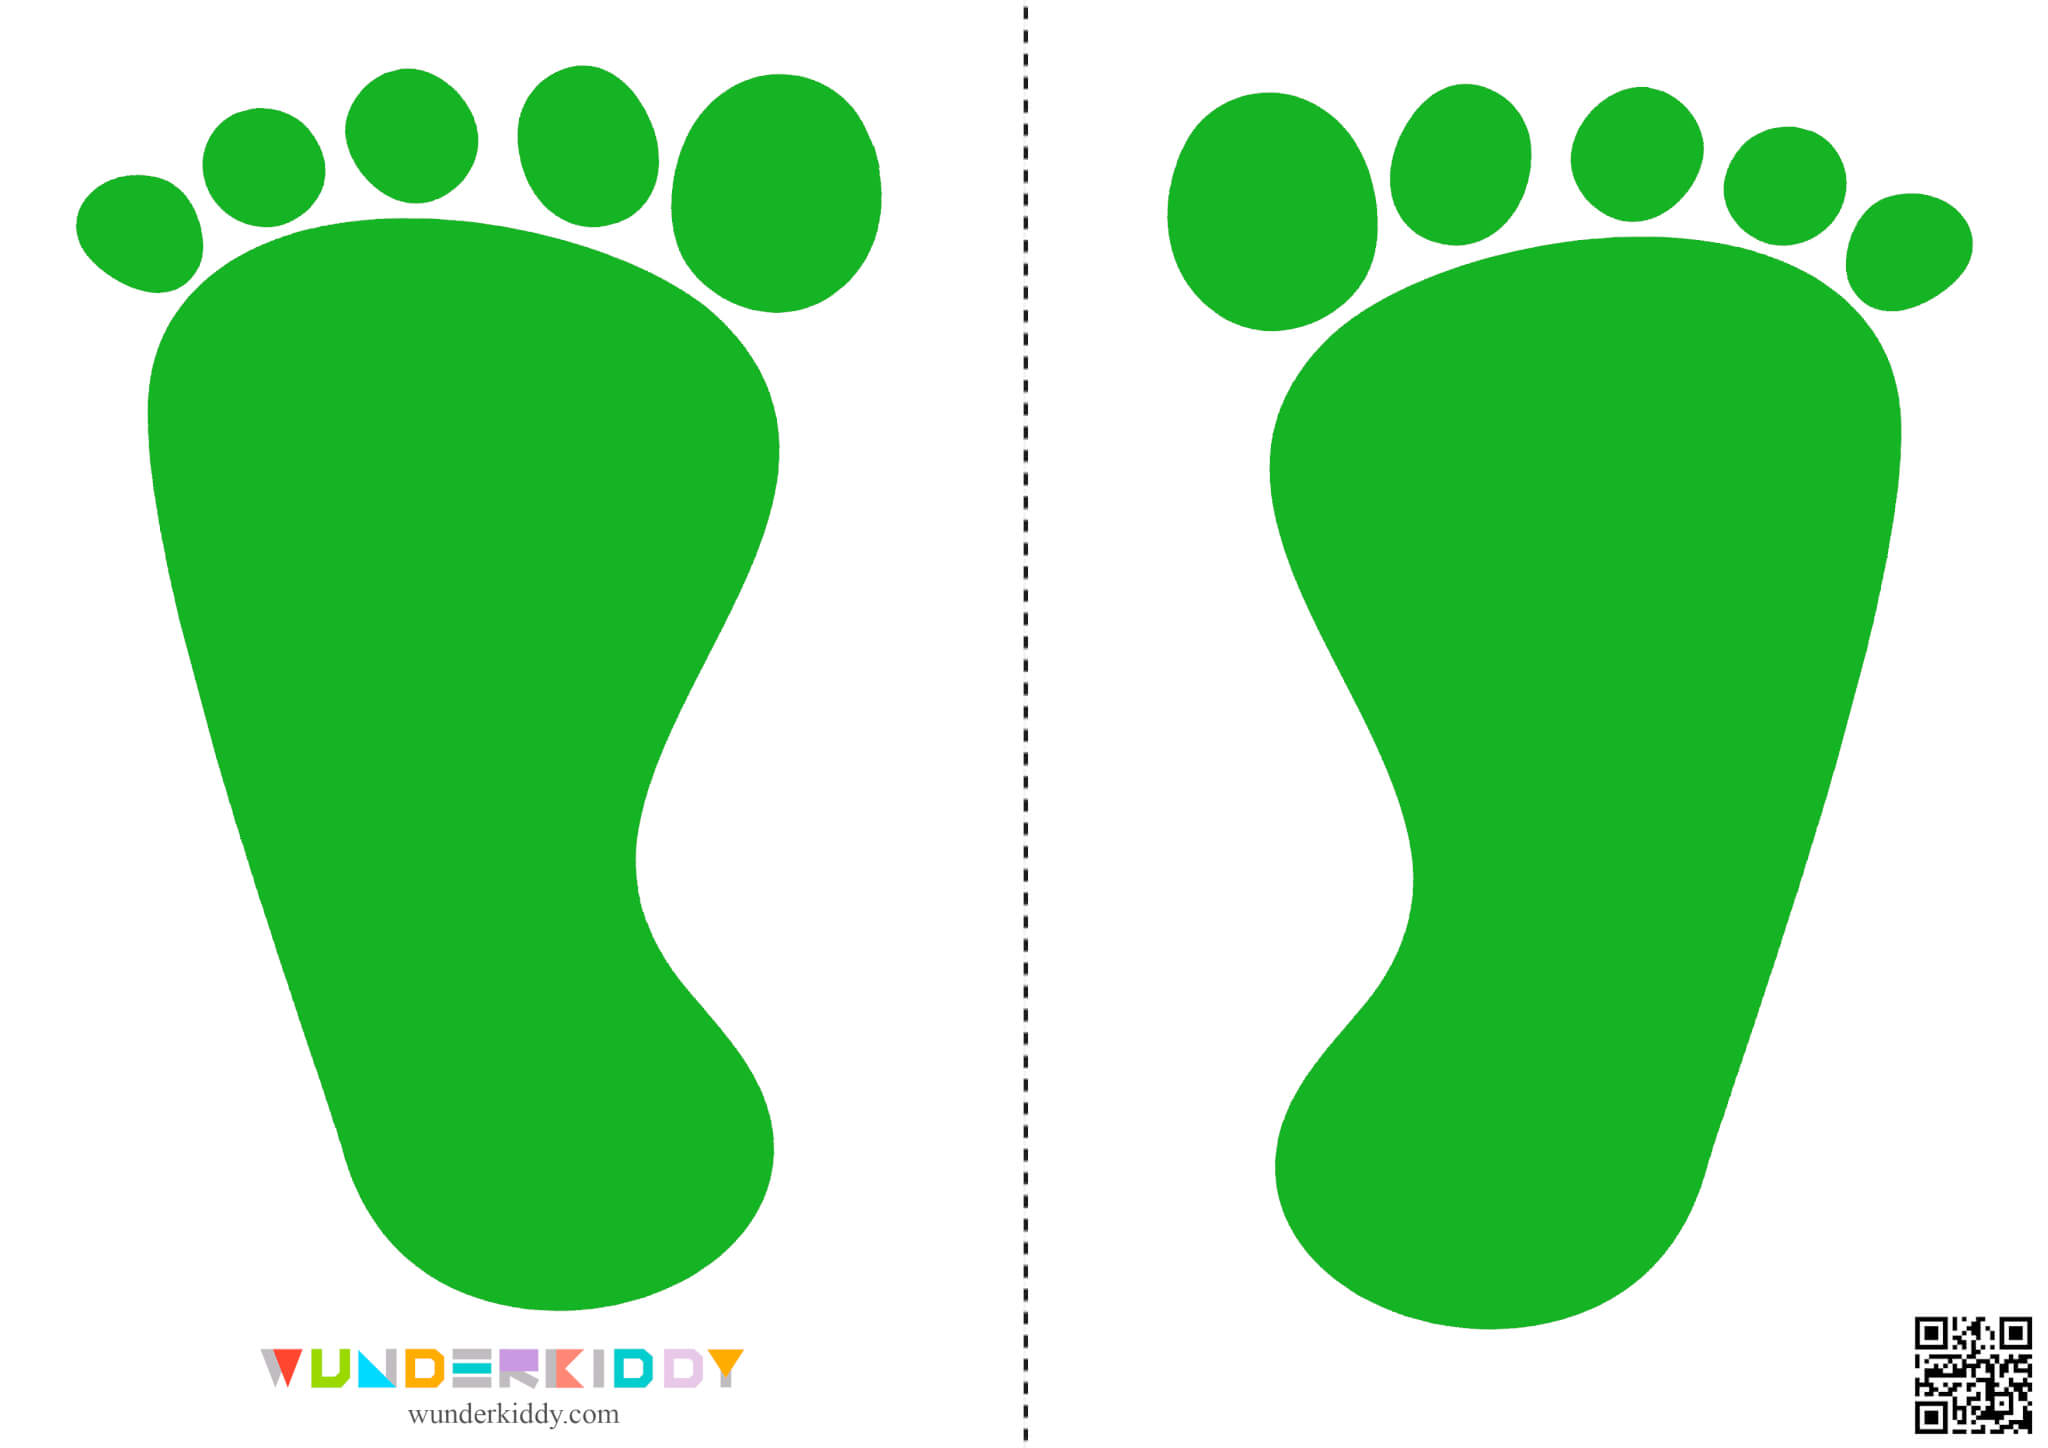 Hands and Feet Color Sensory Path - Image 17